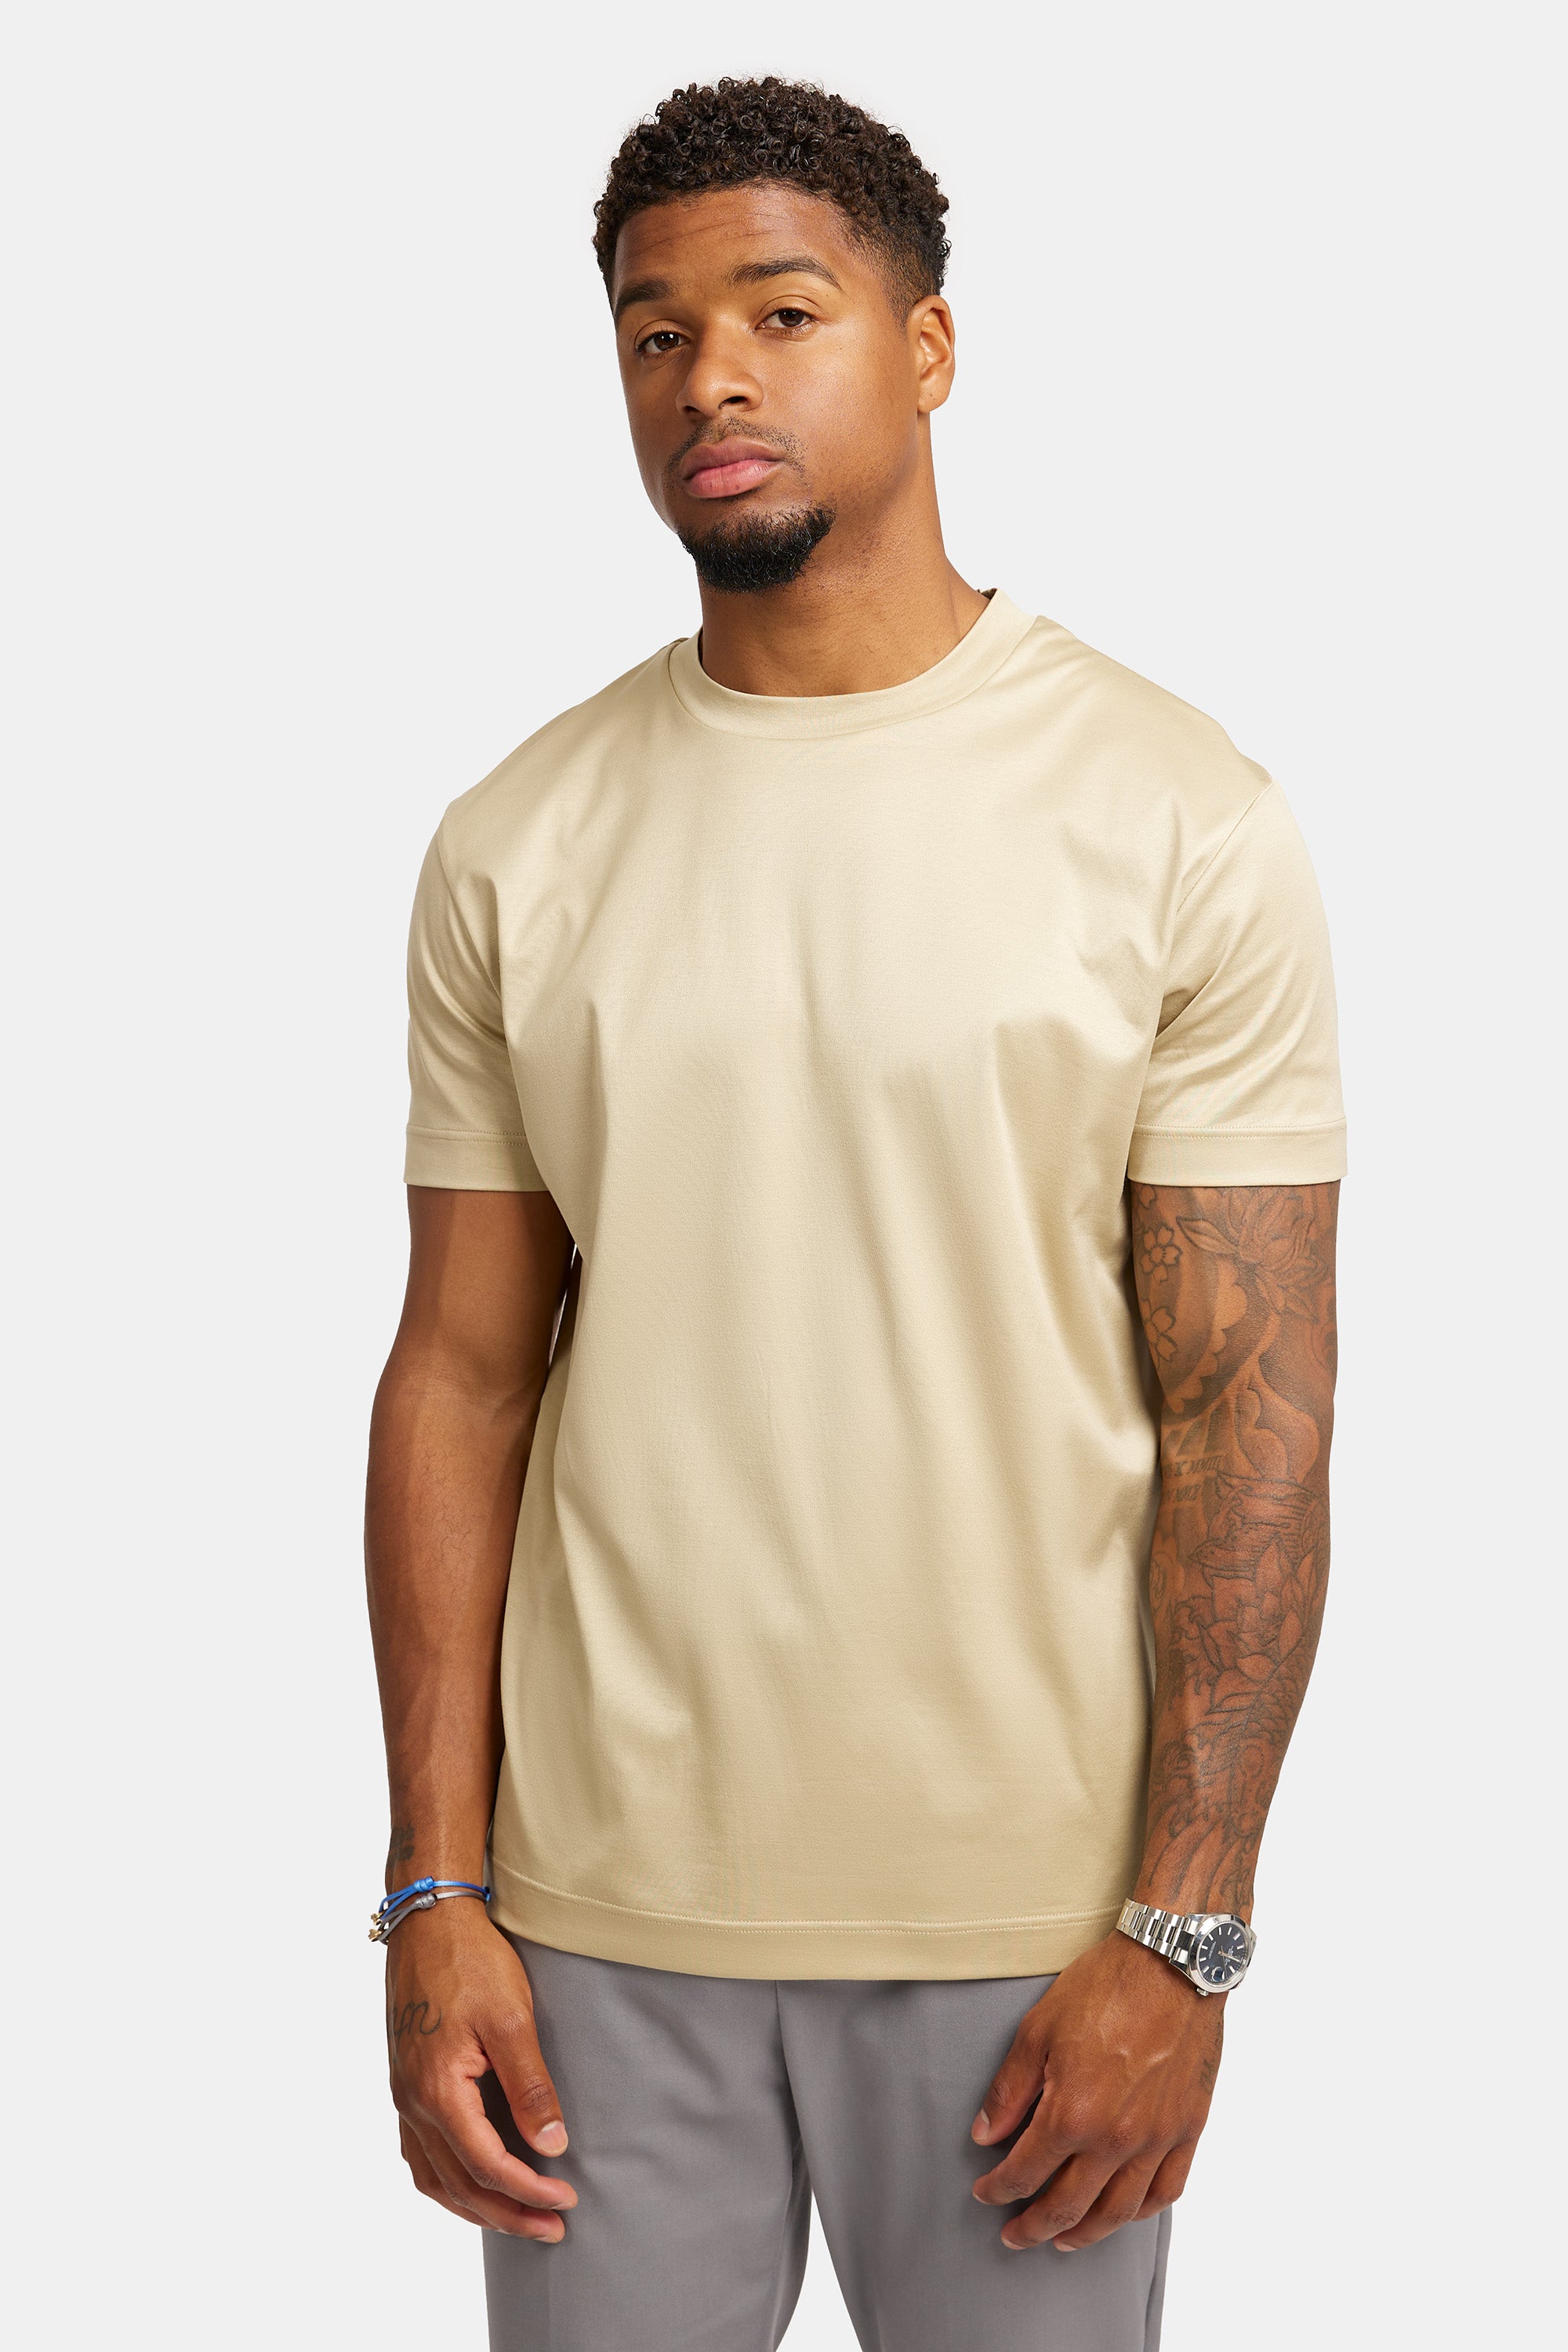 Stone Taupe T-shirt